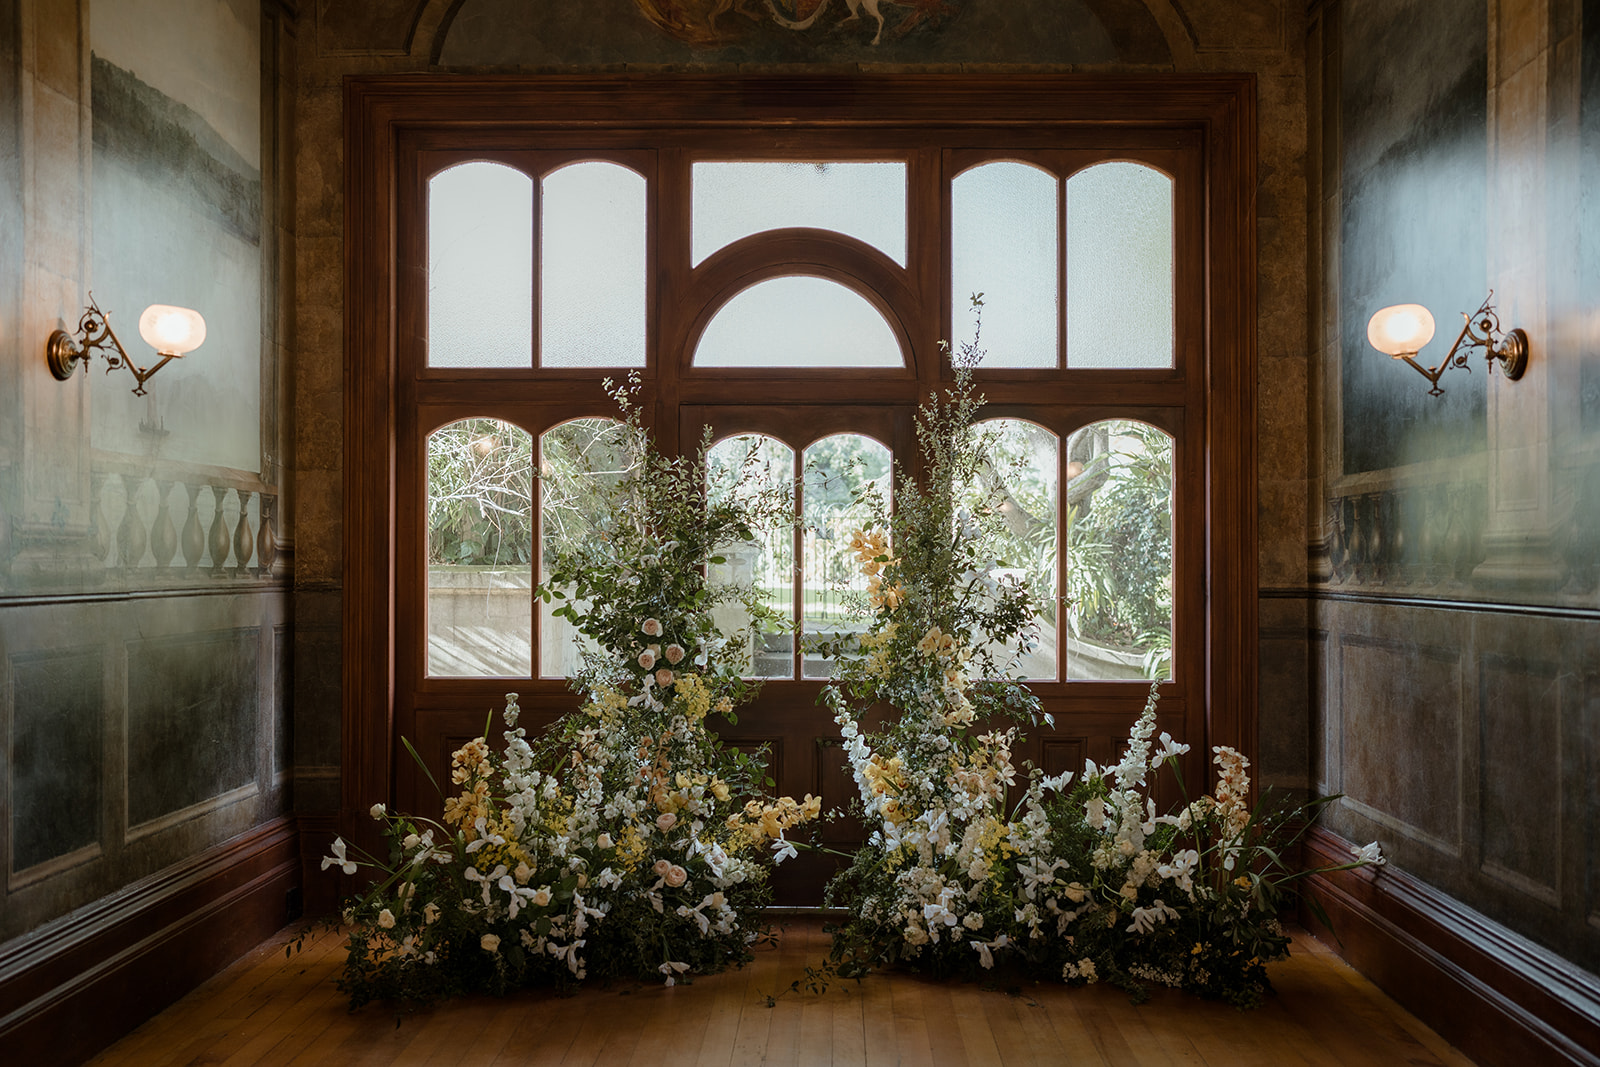 Luxury Wedding Ceremony at Villa Alba Museum with Pastal Floral Arrangements and Curved Windows